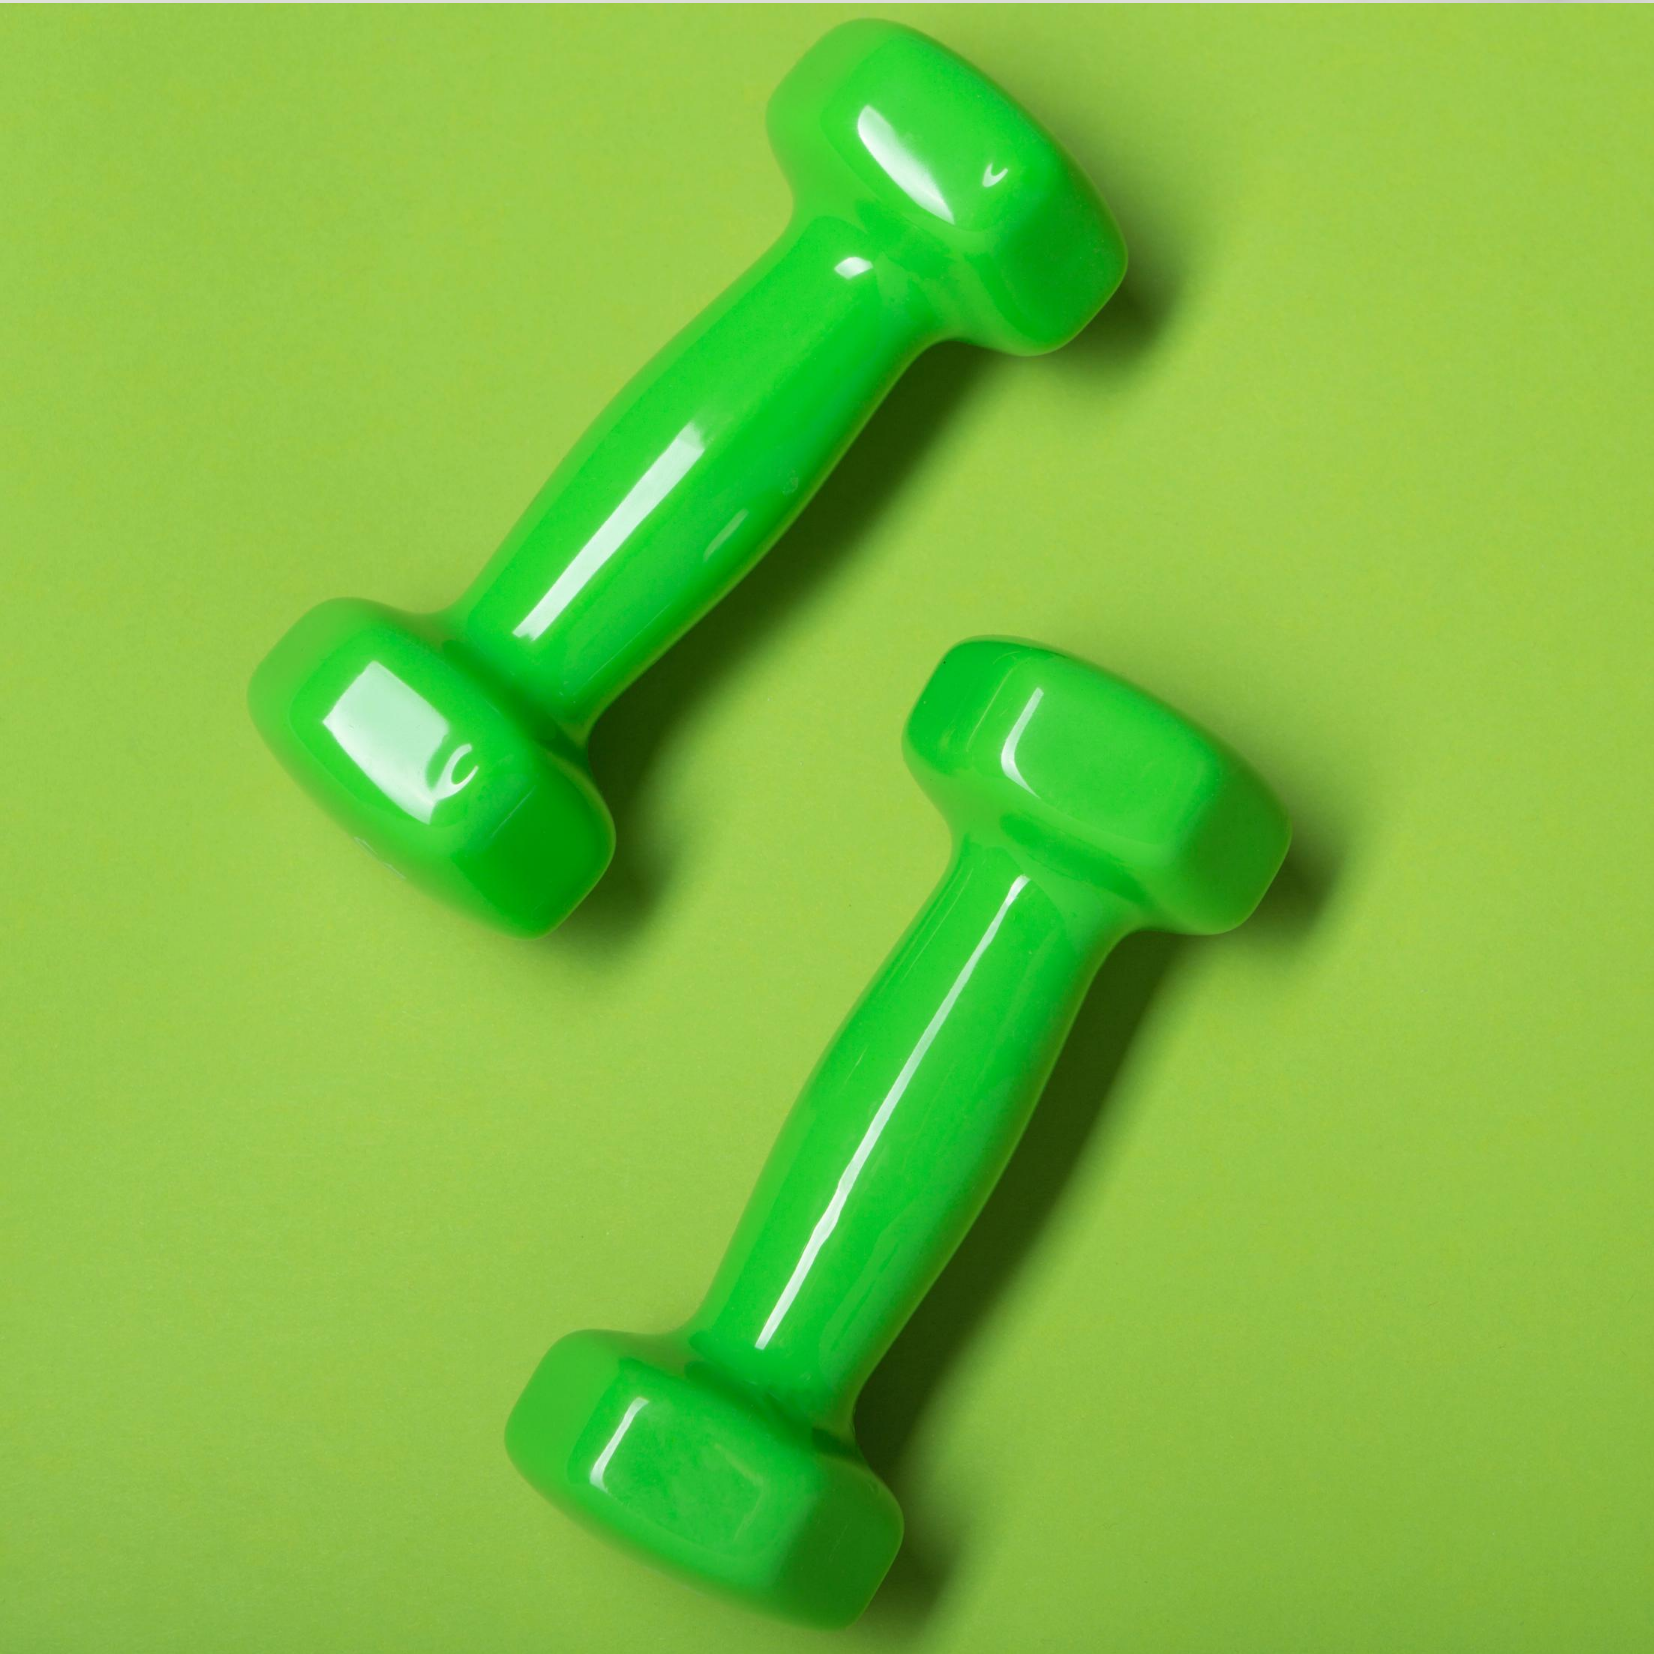 Green Hand Weights depicting Sports Nutrition